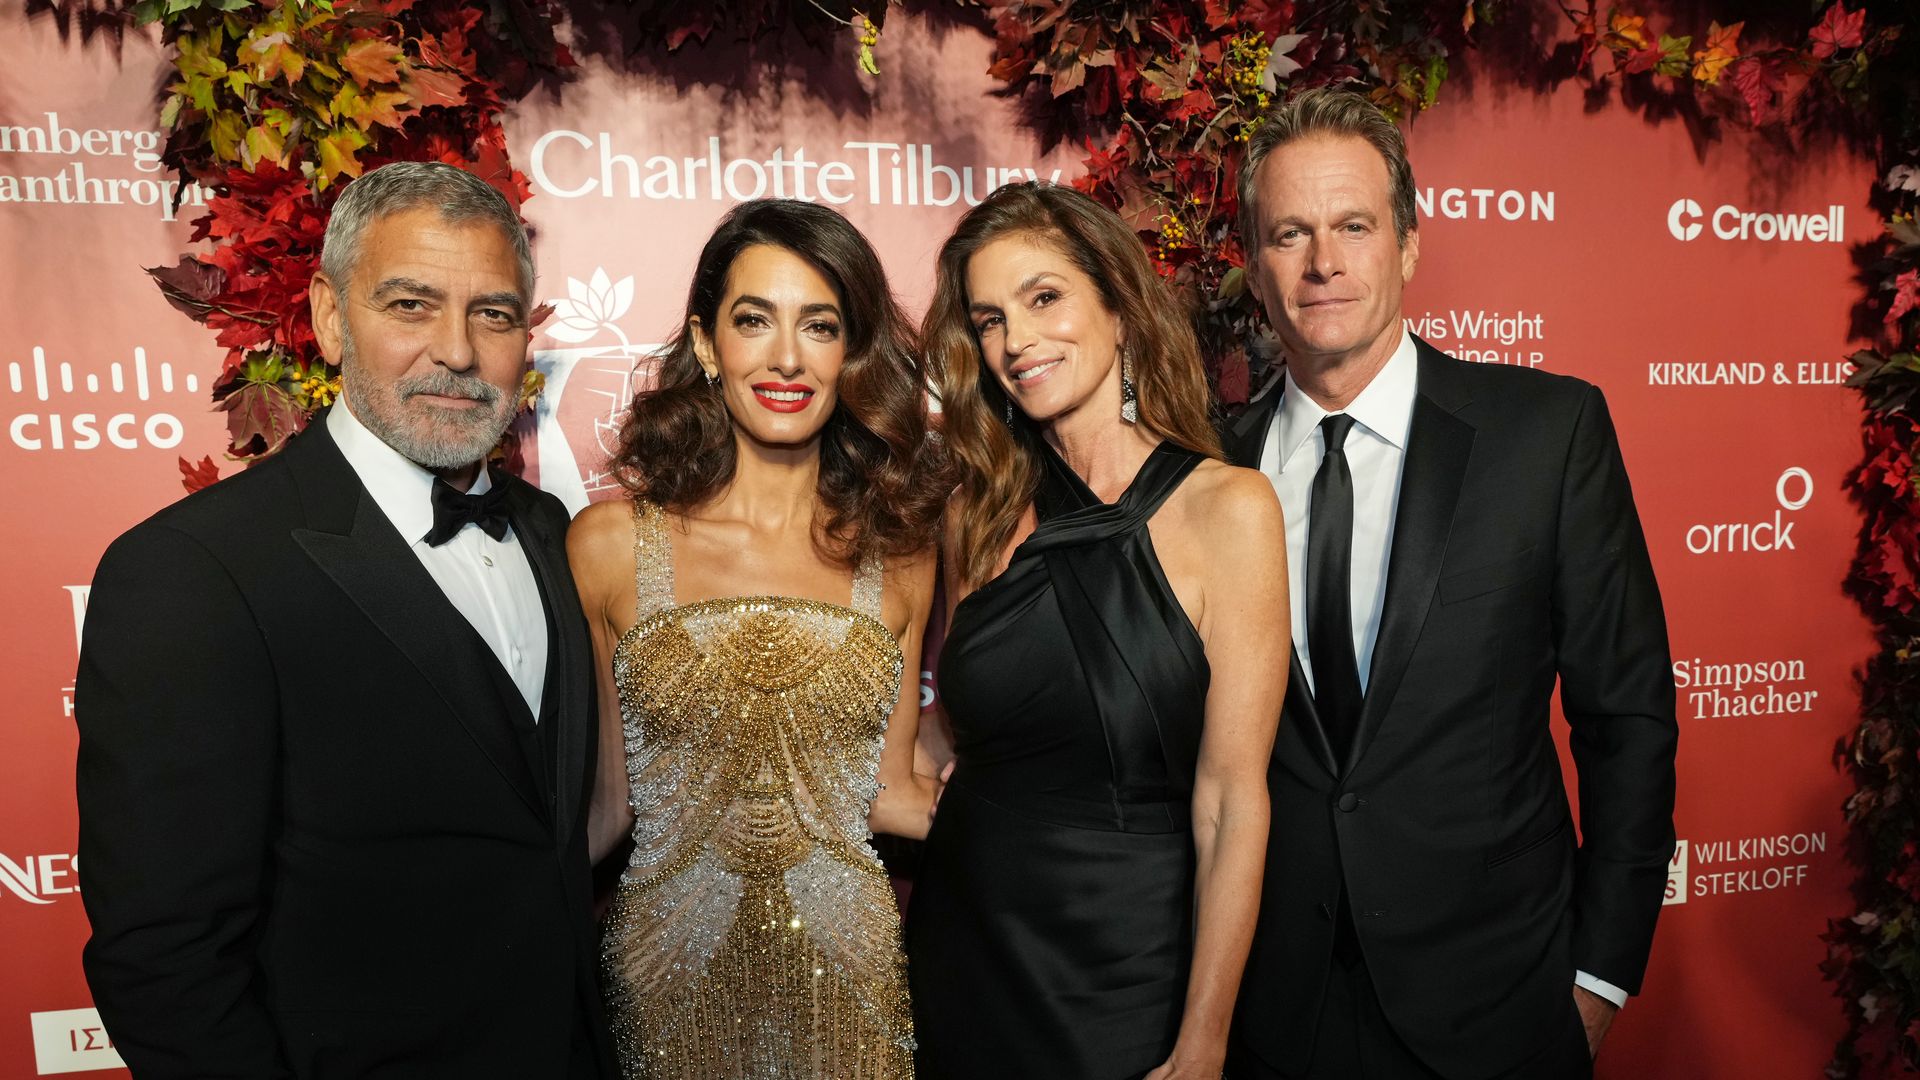 George Clooney, Amal Clooney, Cindy Crawford and Rande Gerber attend the Clooney Foundation For Justice Inaugural Albie Awards at New York Public Library on September 29, 2022 in New York City